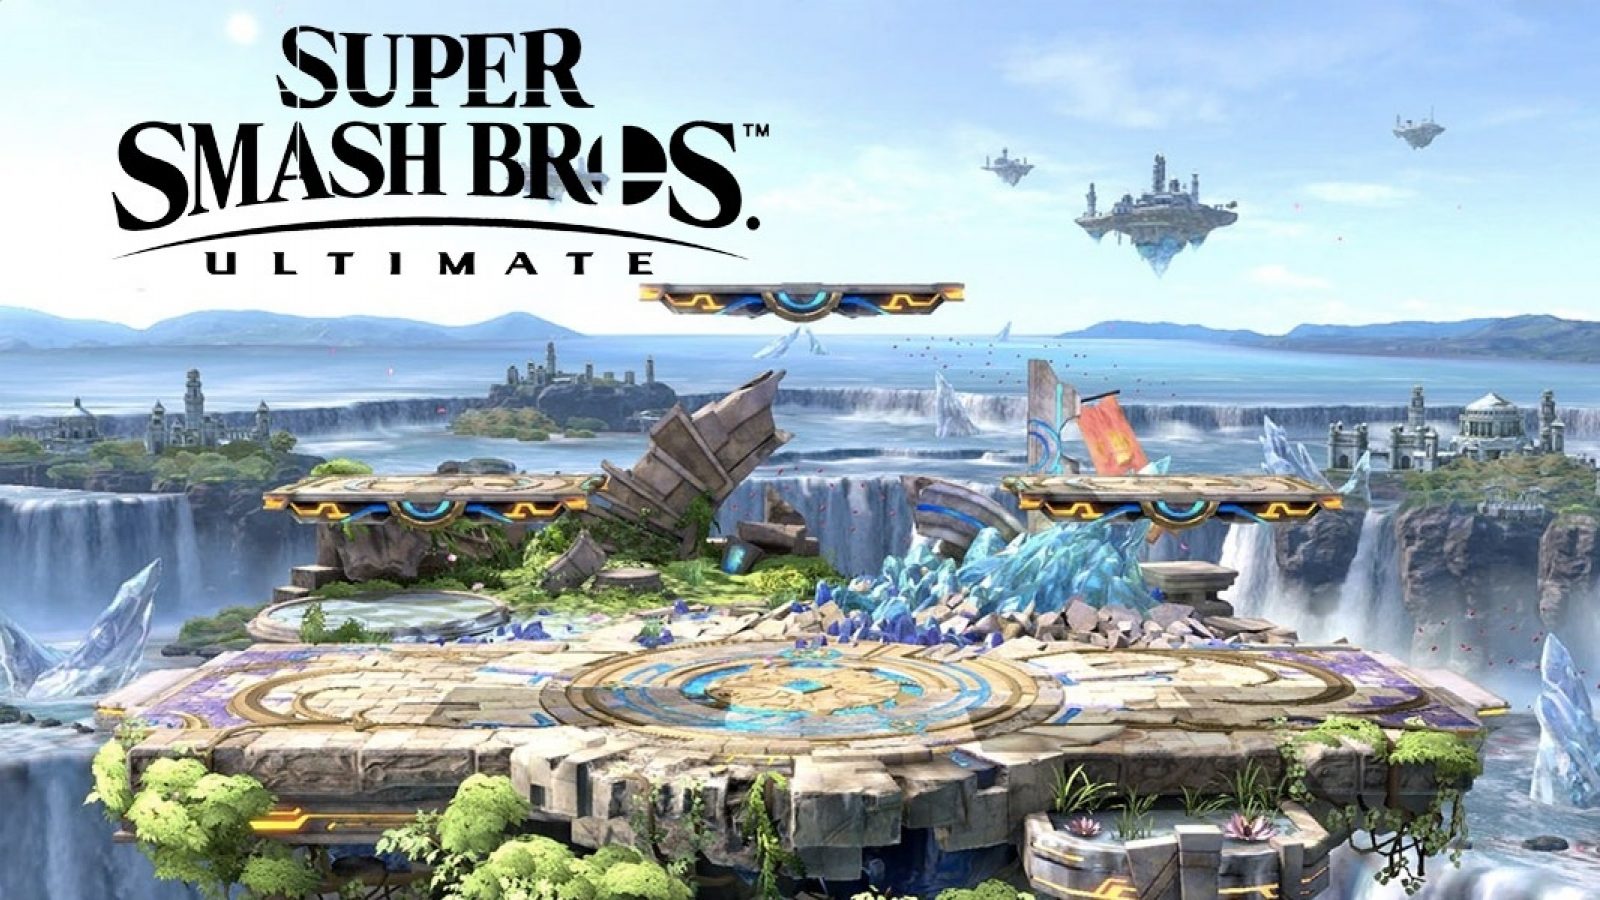 Super Smash Bros. Ultimate: How to finish the “Torchlight reveals